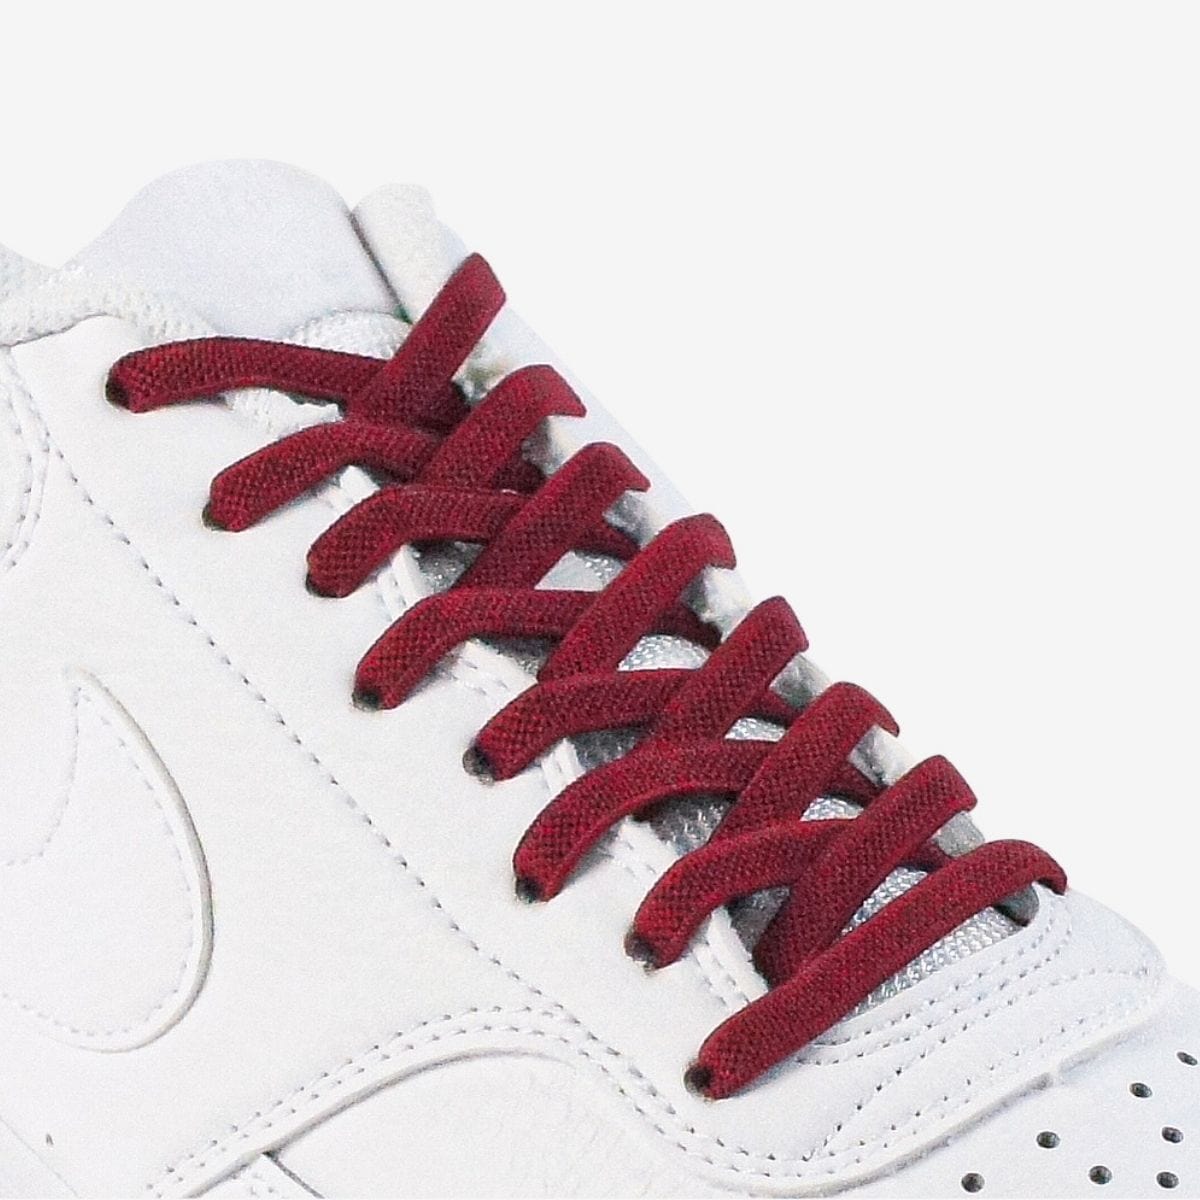 kids-no-tie-shoelaces-with-dark-red-laces-on-nike-white-sneakers-by-kicks-shoelaces